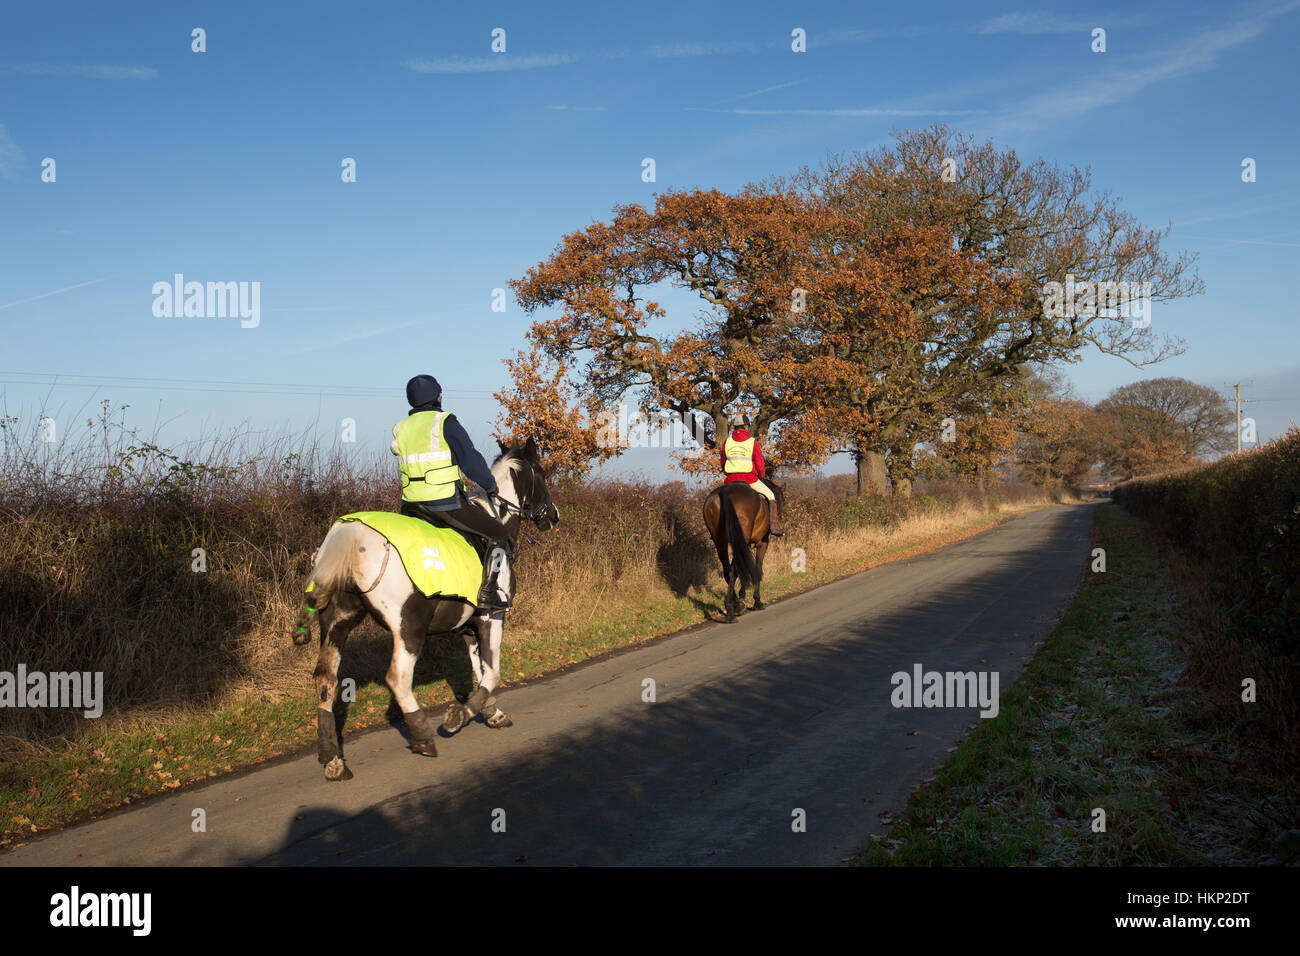 Rural Cheshire, England. Picturesque autumnal view of horse riders on a rural road near the village of Coddington. Stock Photo